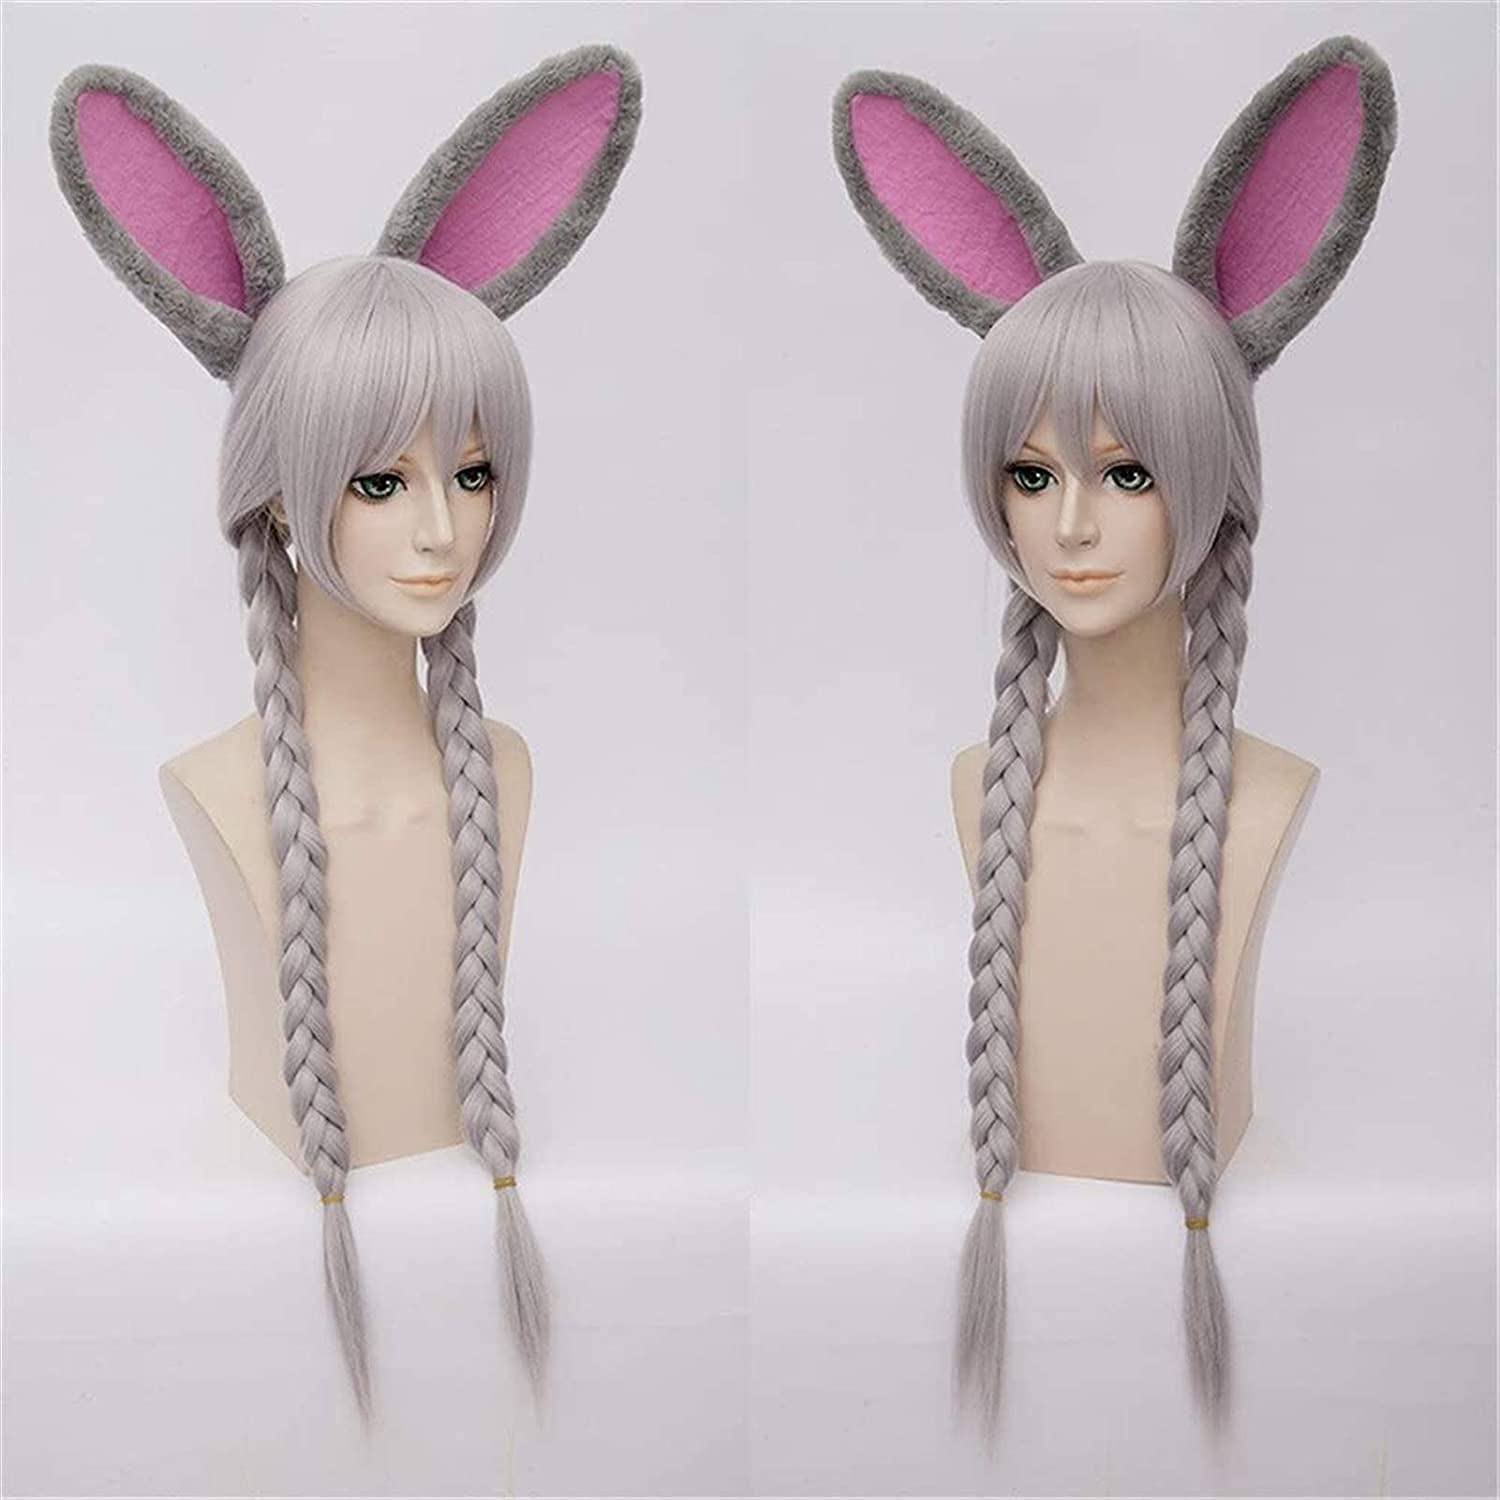 Cosplay Wig Zootopia Judy Hopps Silvery Long Wigs Styled Frauen Cosplay Party Fashion Anime Human Costume Full wigs Synthetic Haar Heat Resistant F...